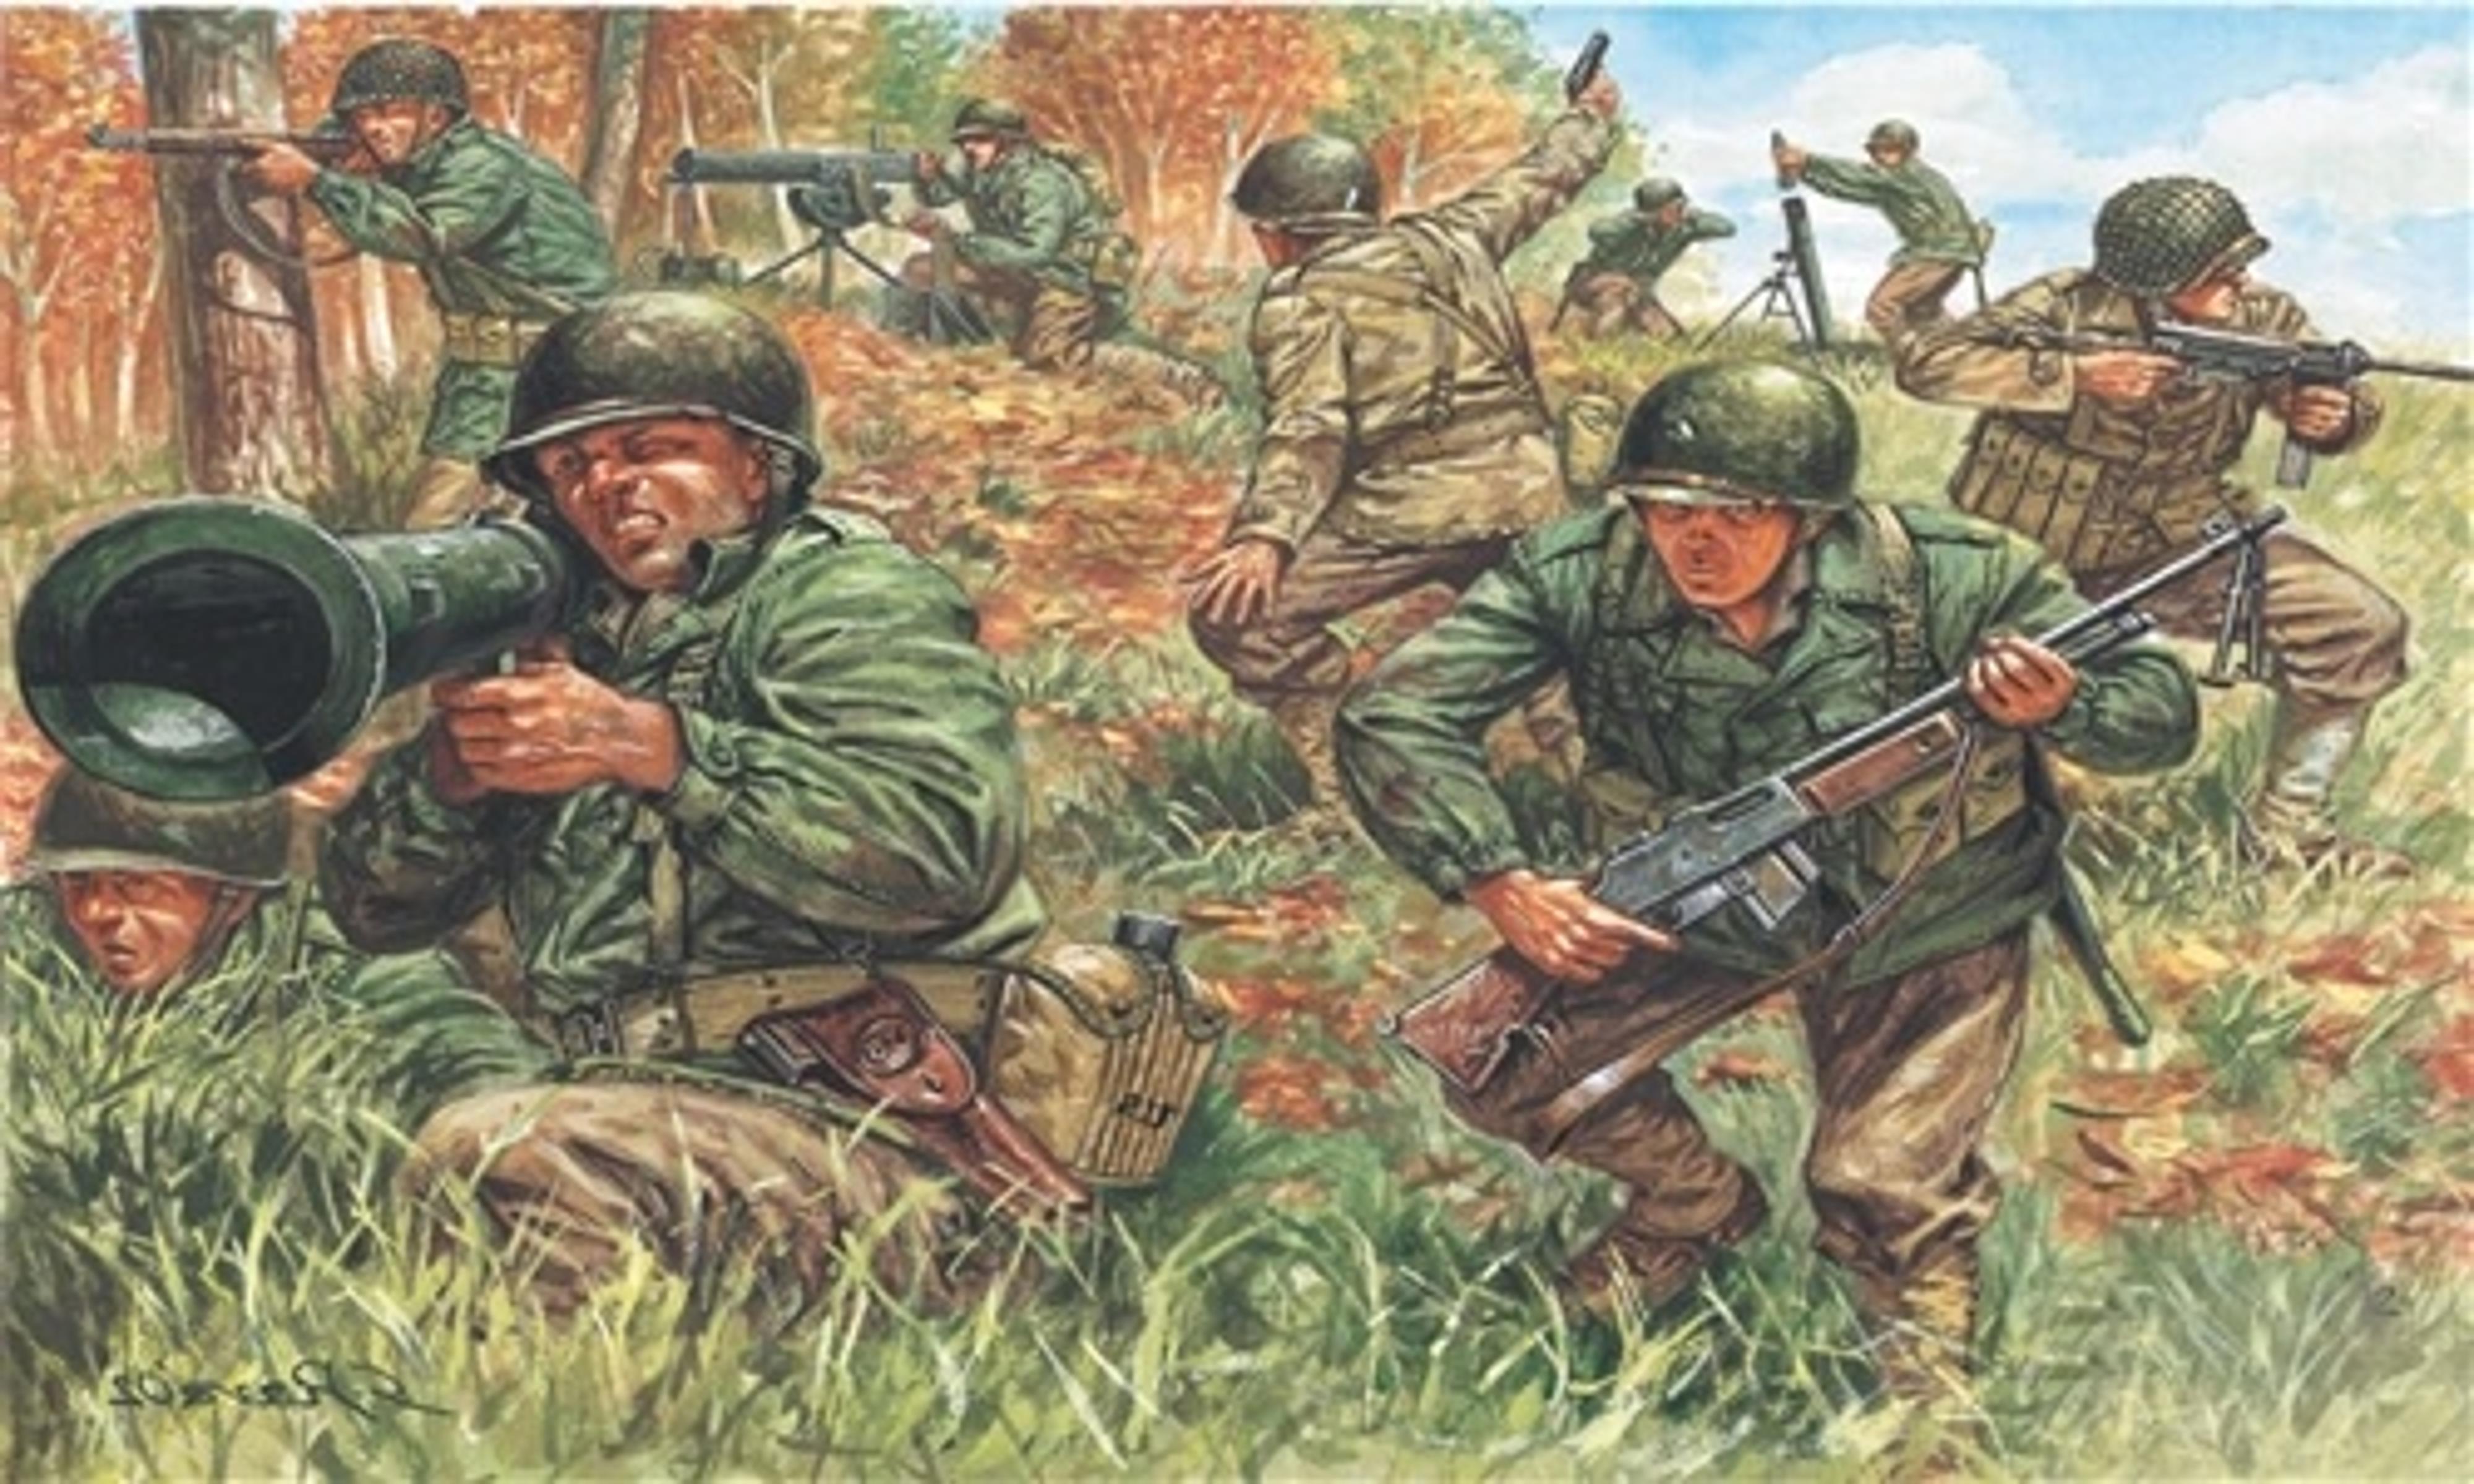 1/72 WWII US Infantry 2nd Division